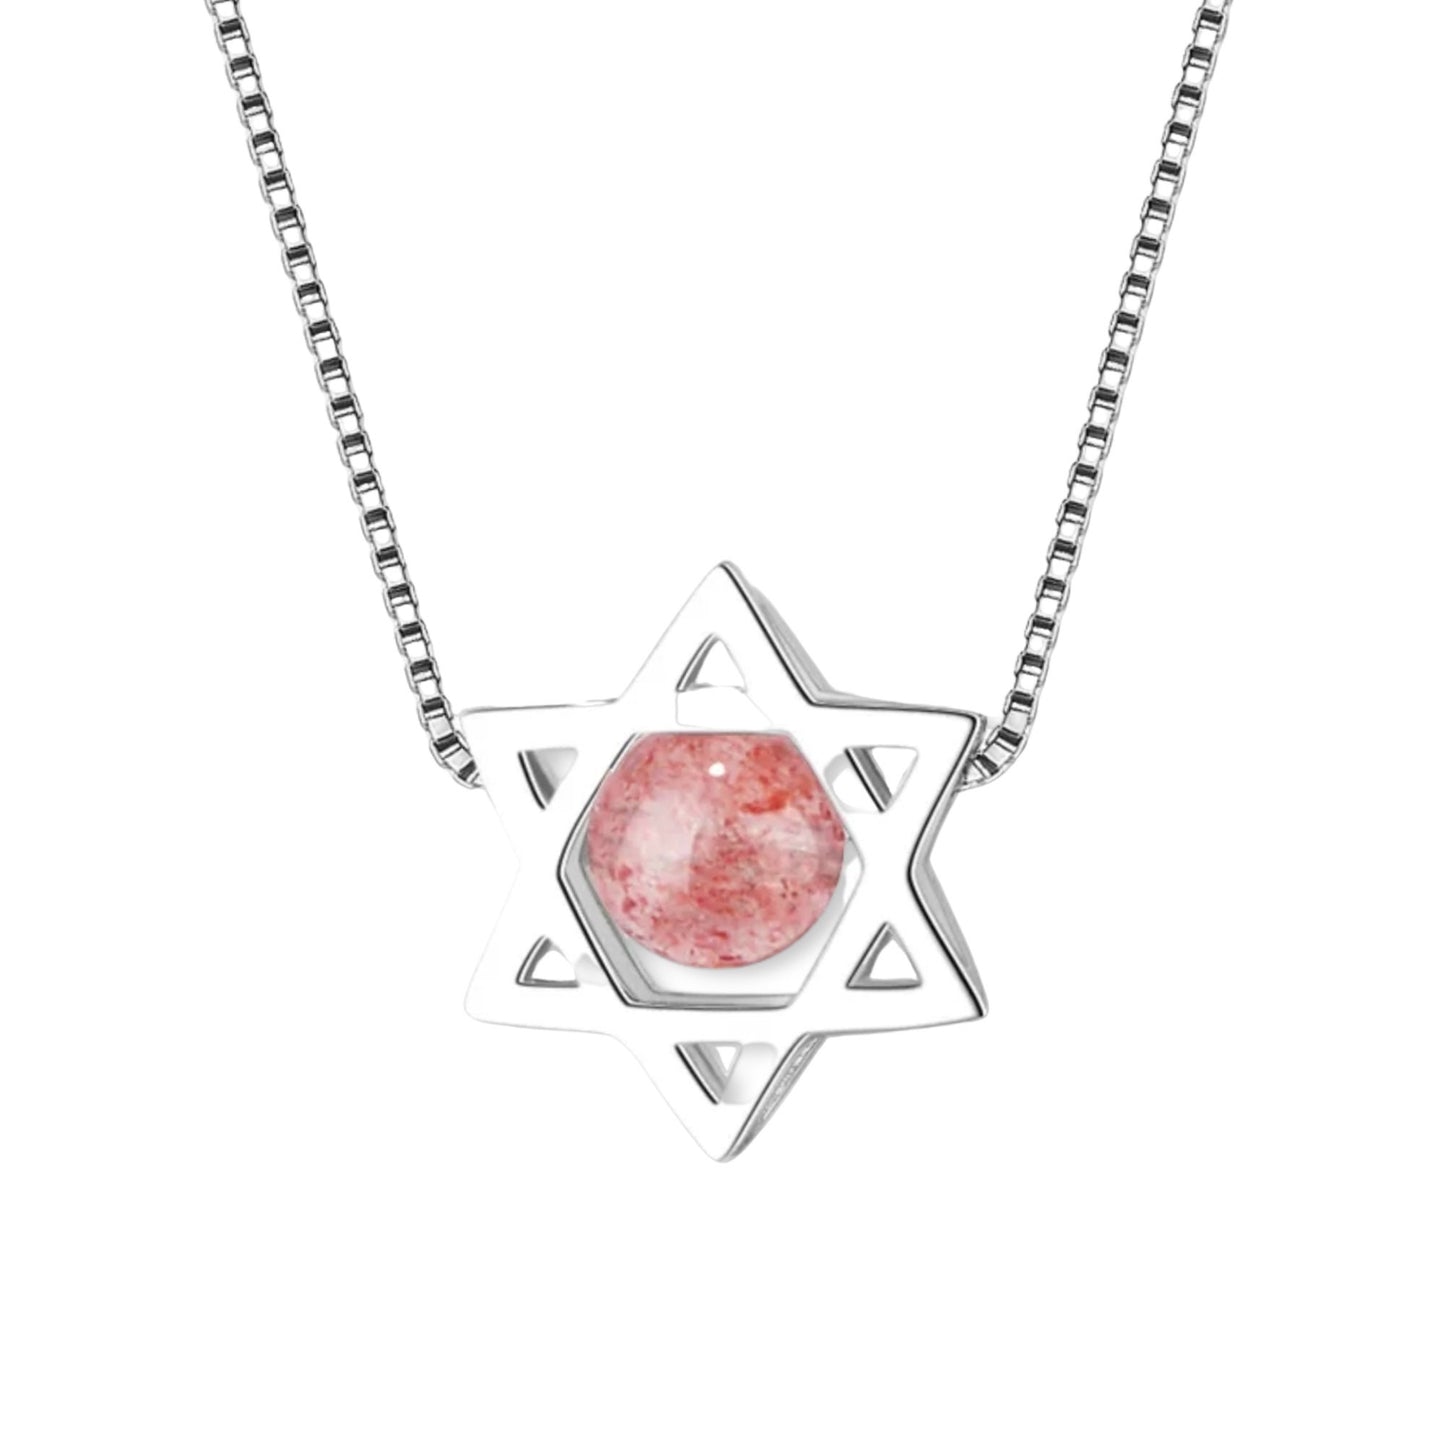 Sterling Silver Star Of David Necklace With Pink/White Quartz